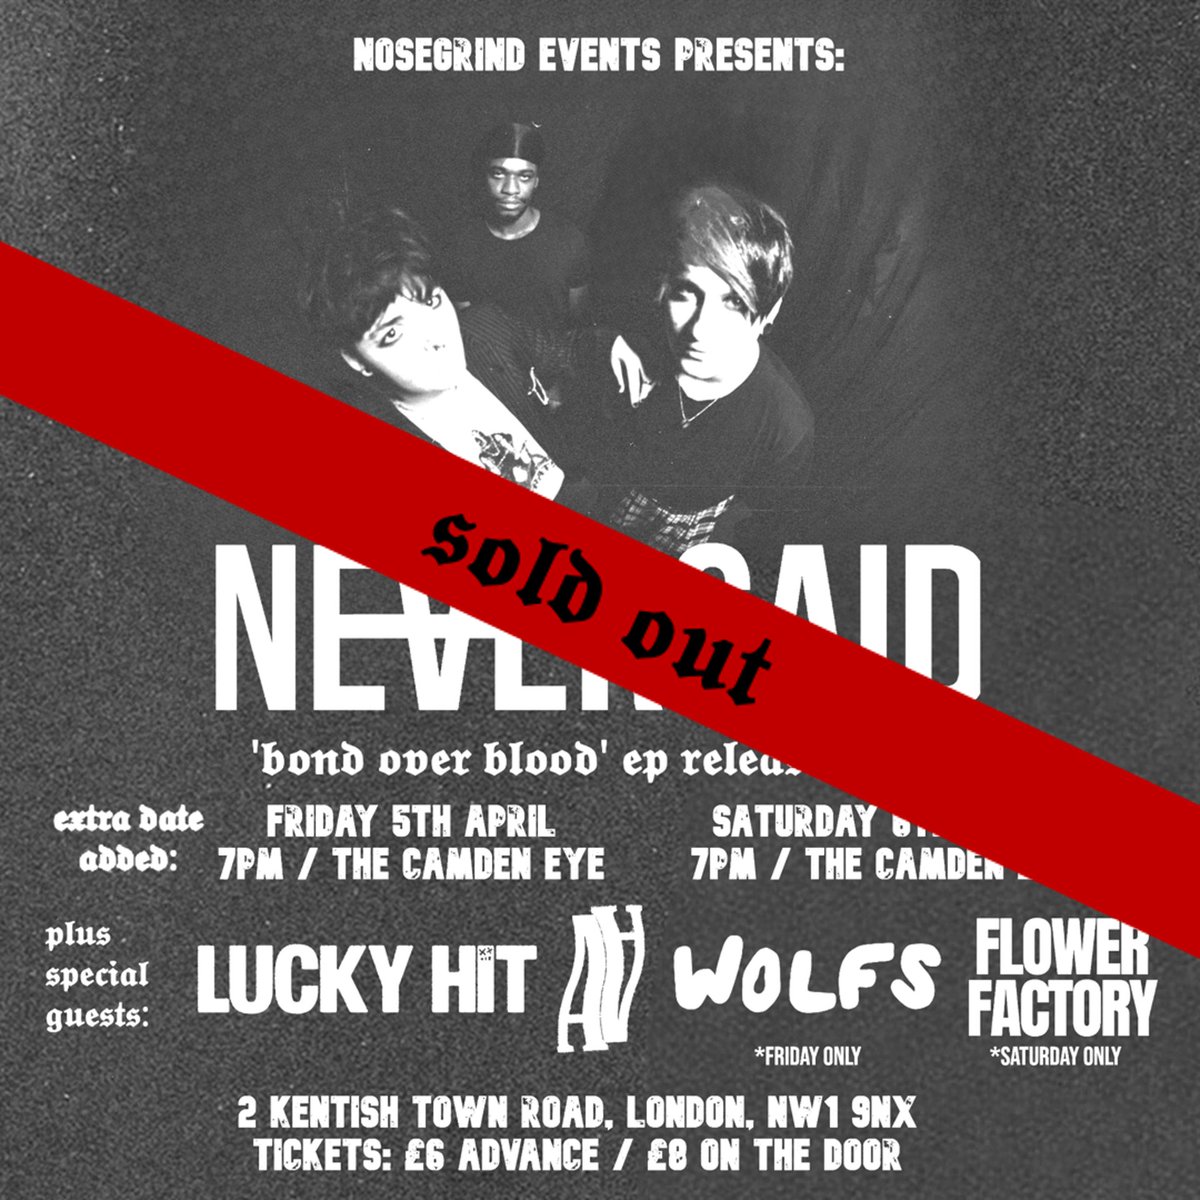 𝖘𝖔𝖑𝖉 𝖔𝖚𝖙 Two sold out nights this weekend at @thecamdeneye. Thank you for your support 🖤 We have held back a very limited number of tickets, which will be available on the door on Friday. Be sure to arrive early to avoid disappointment.